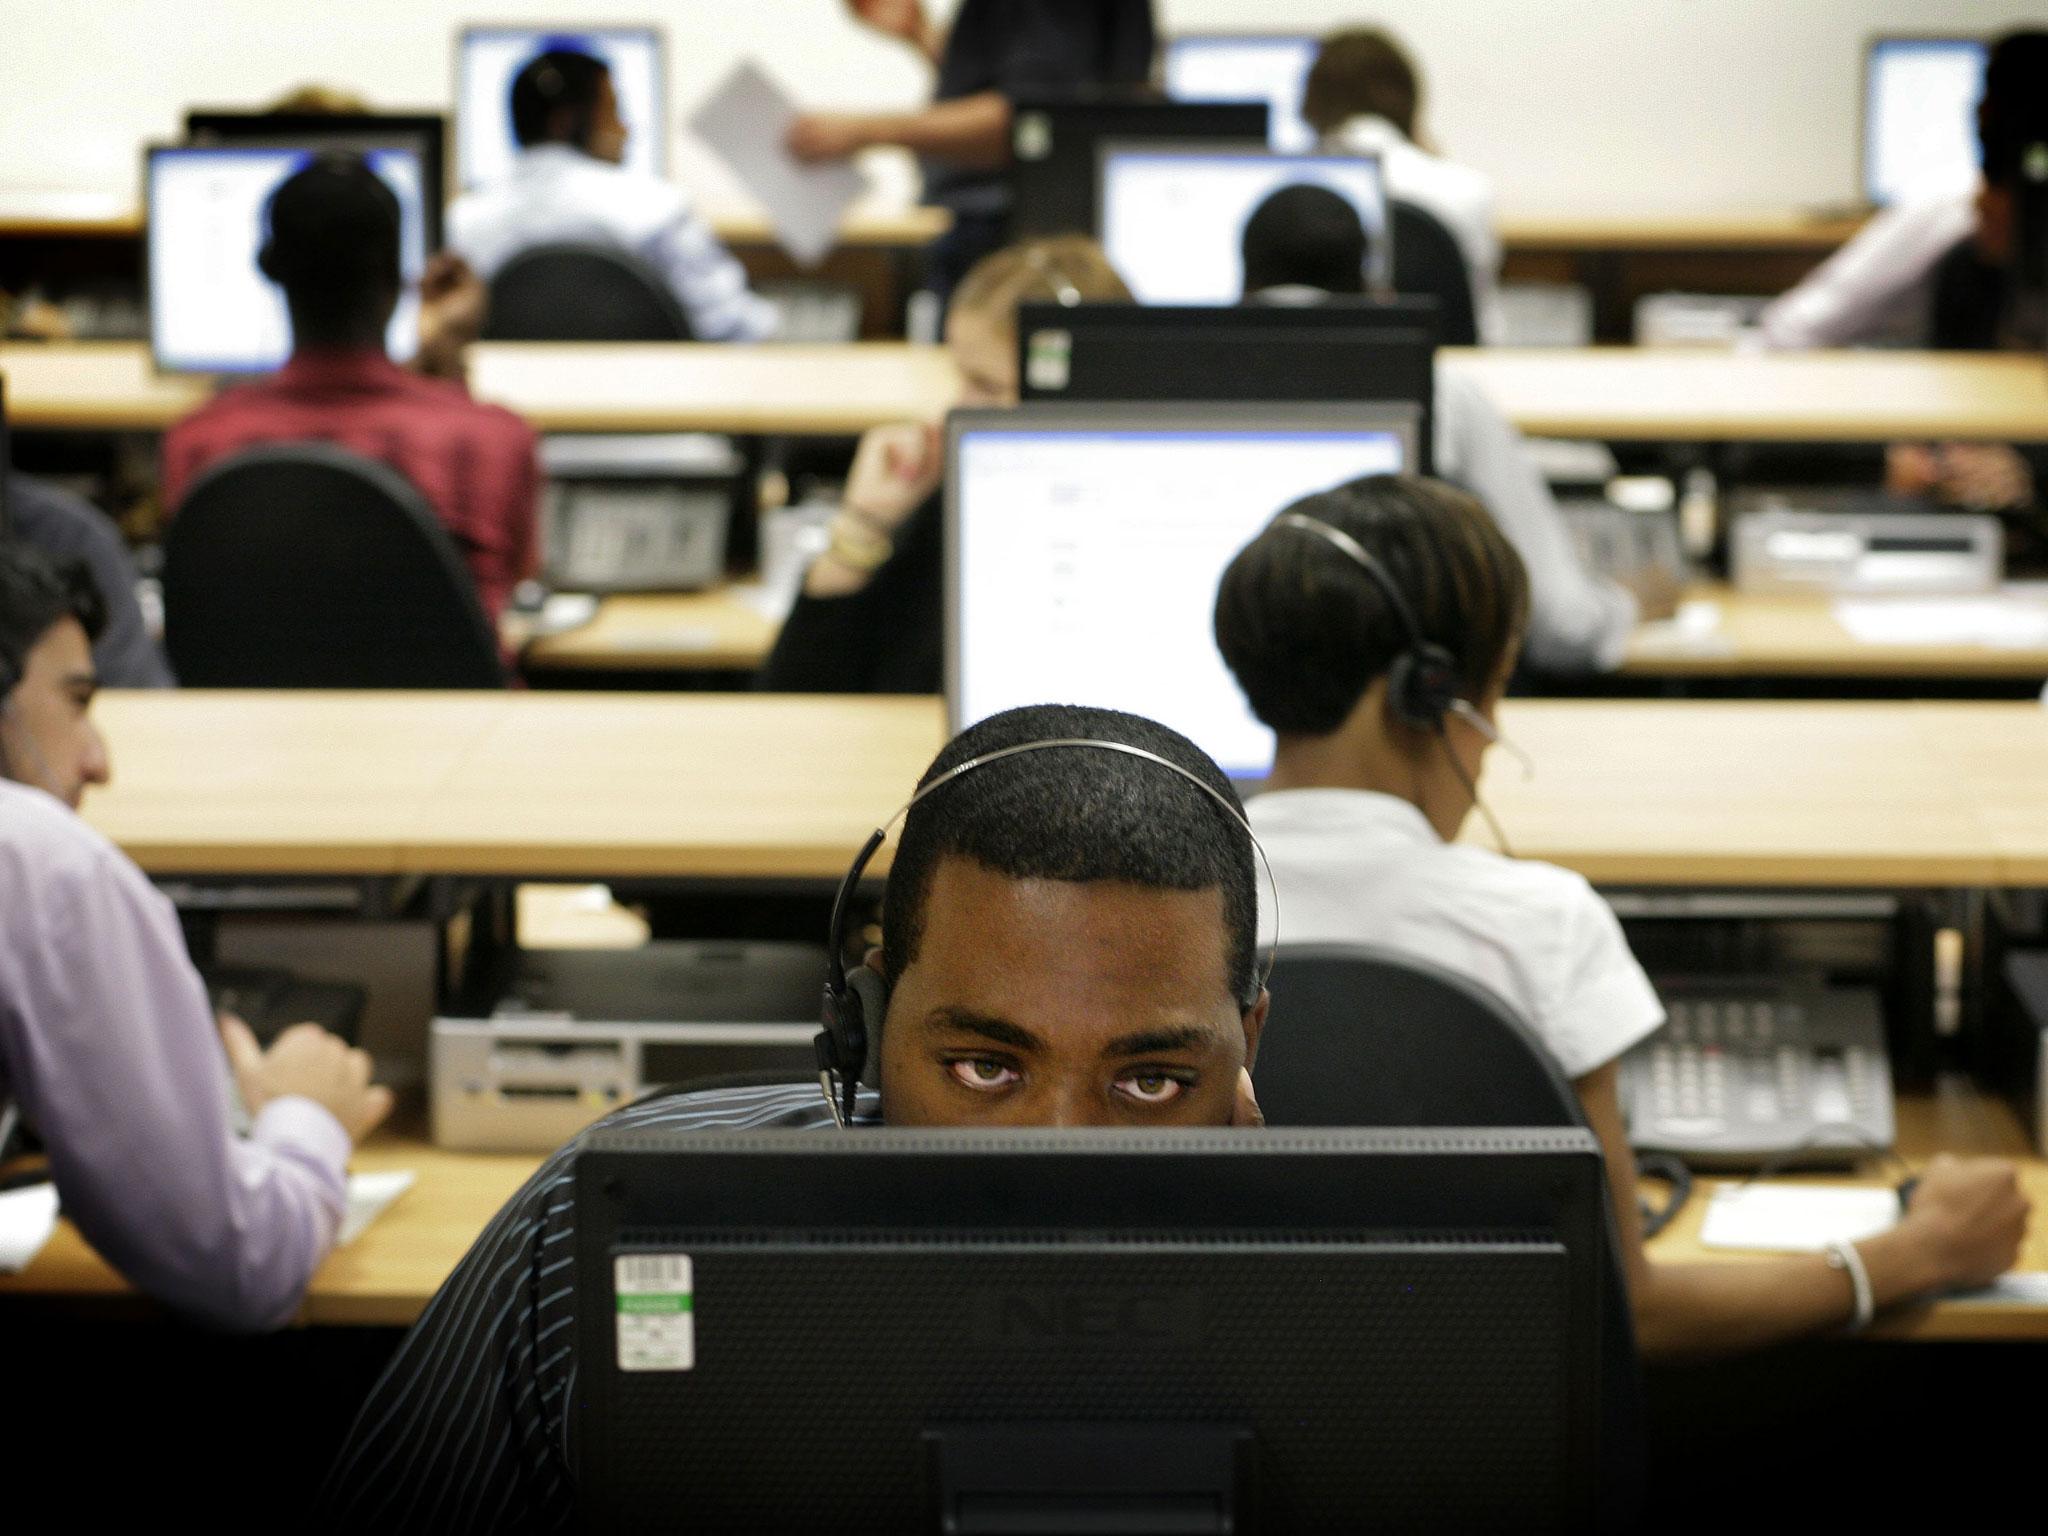 Call centres ae moving on from flogging dodgy double-glazing